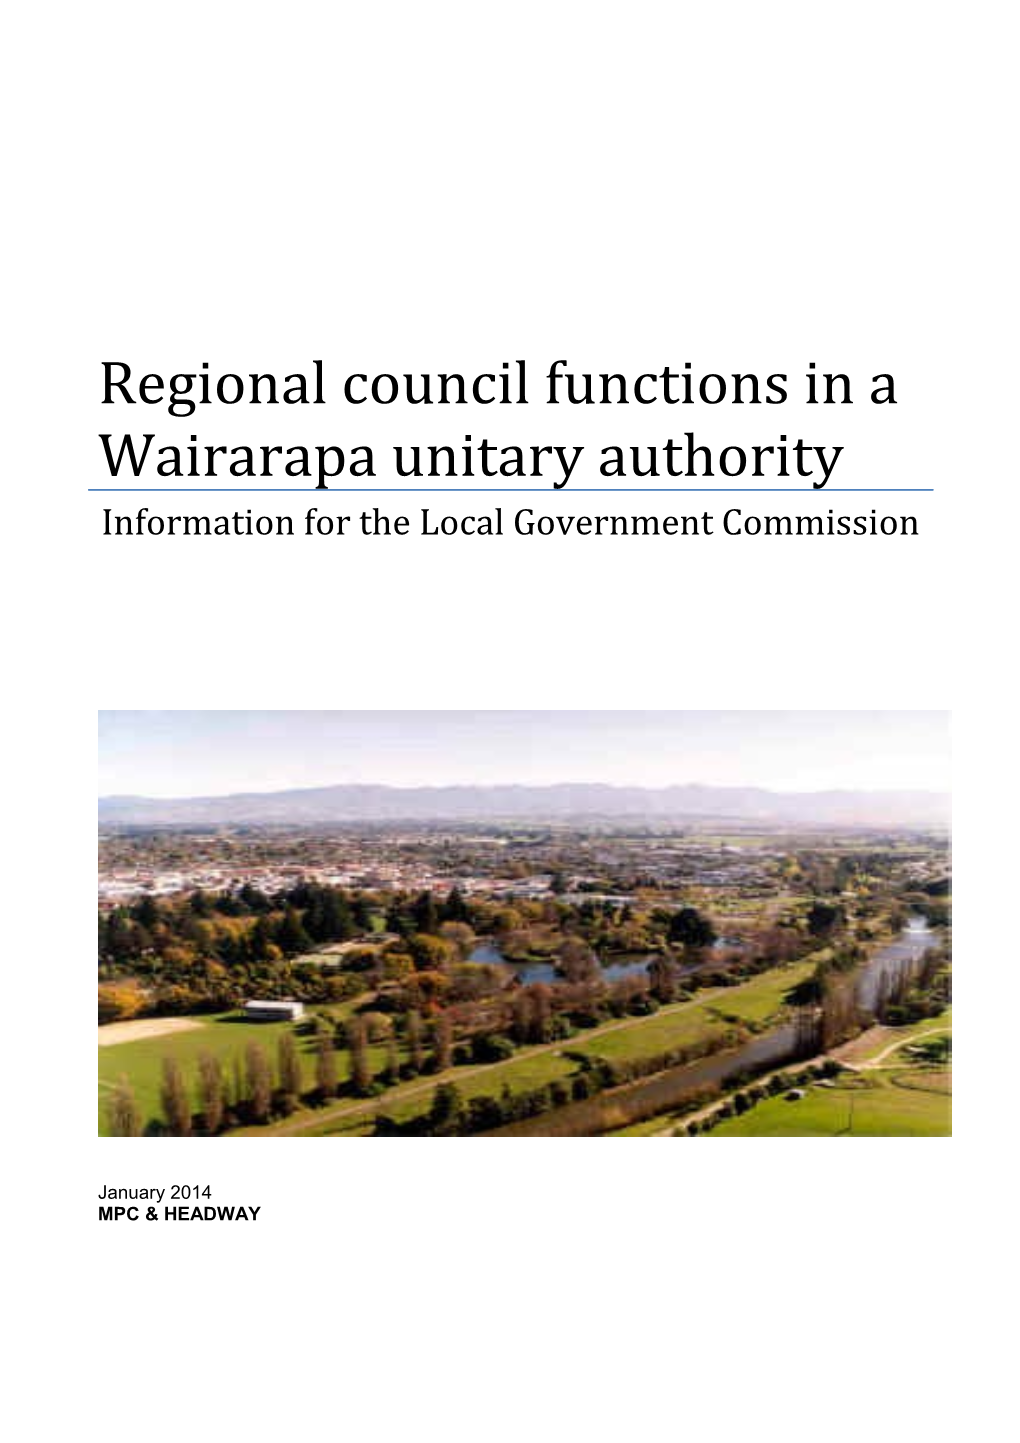 Regional Council Functions in a Wairarapa Unitary Authority